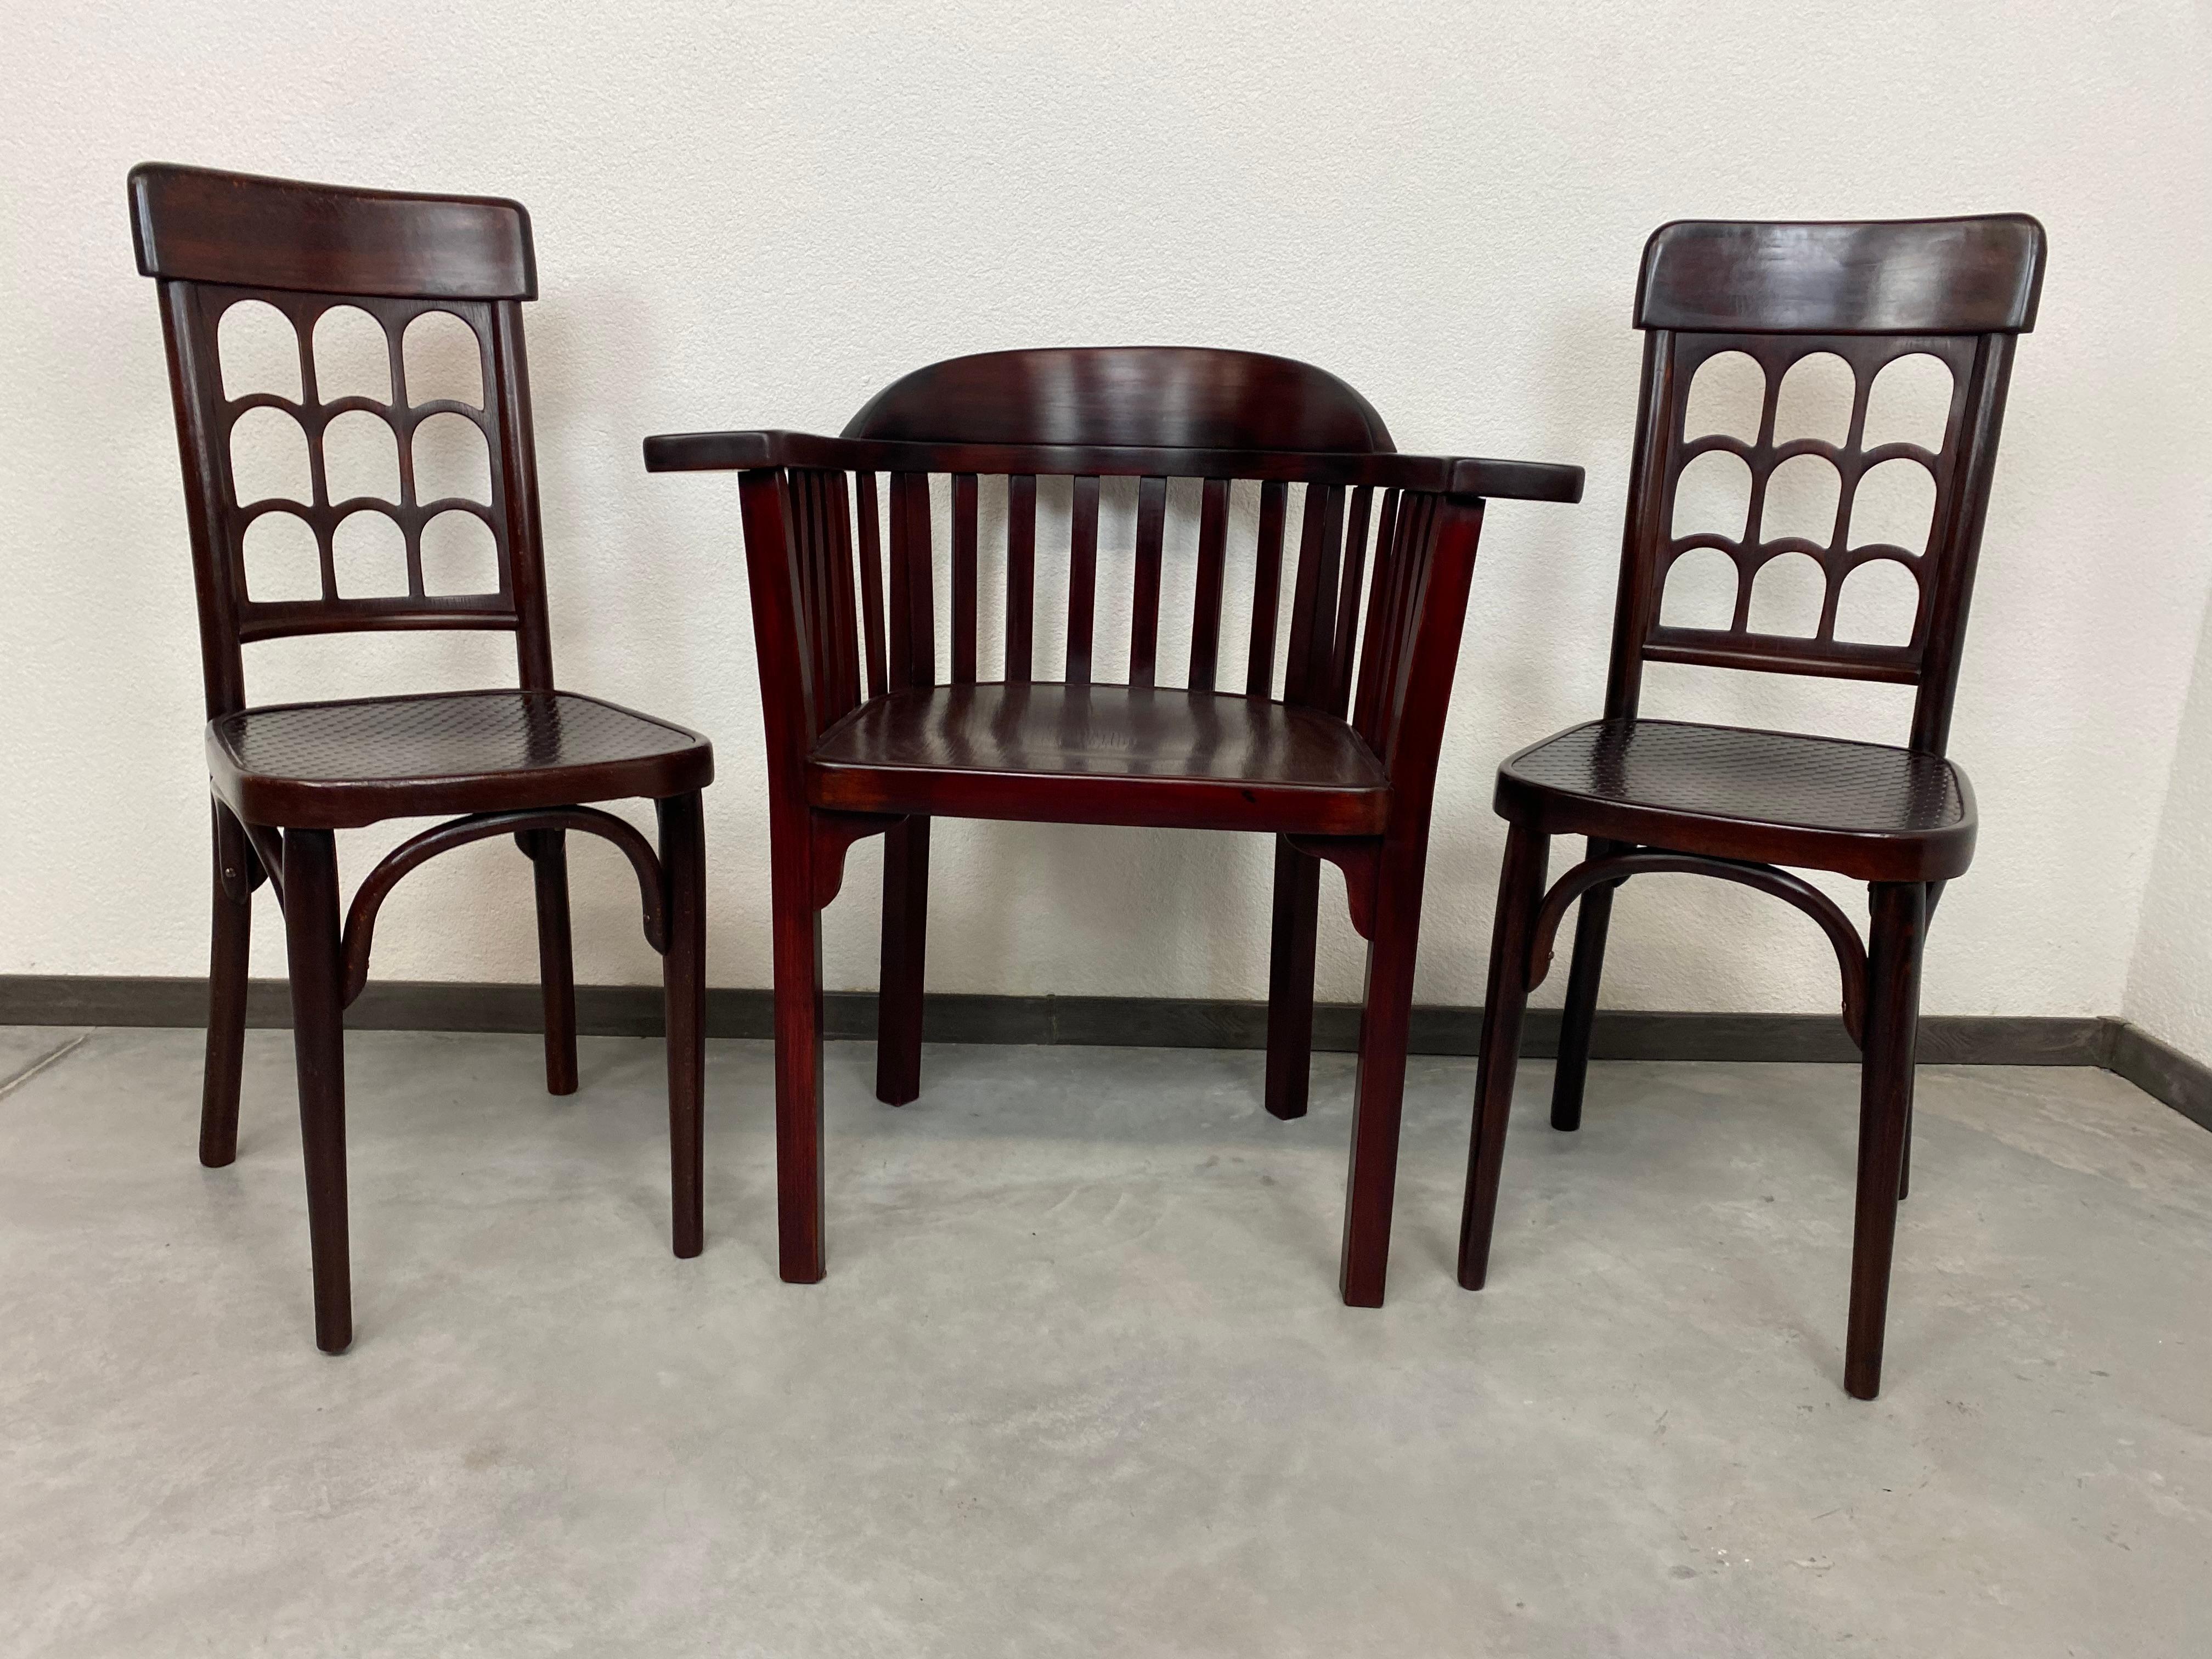 Vienna Secession Josef Hoffmann Beehive Dining Chairs For Sale